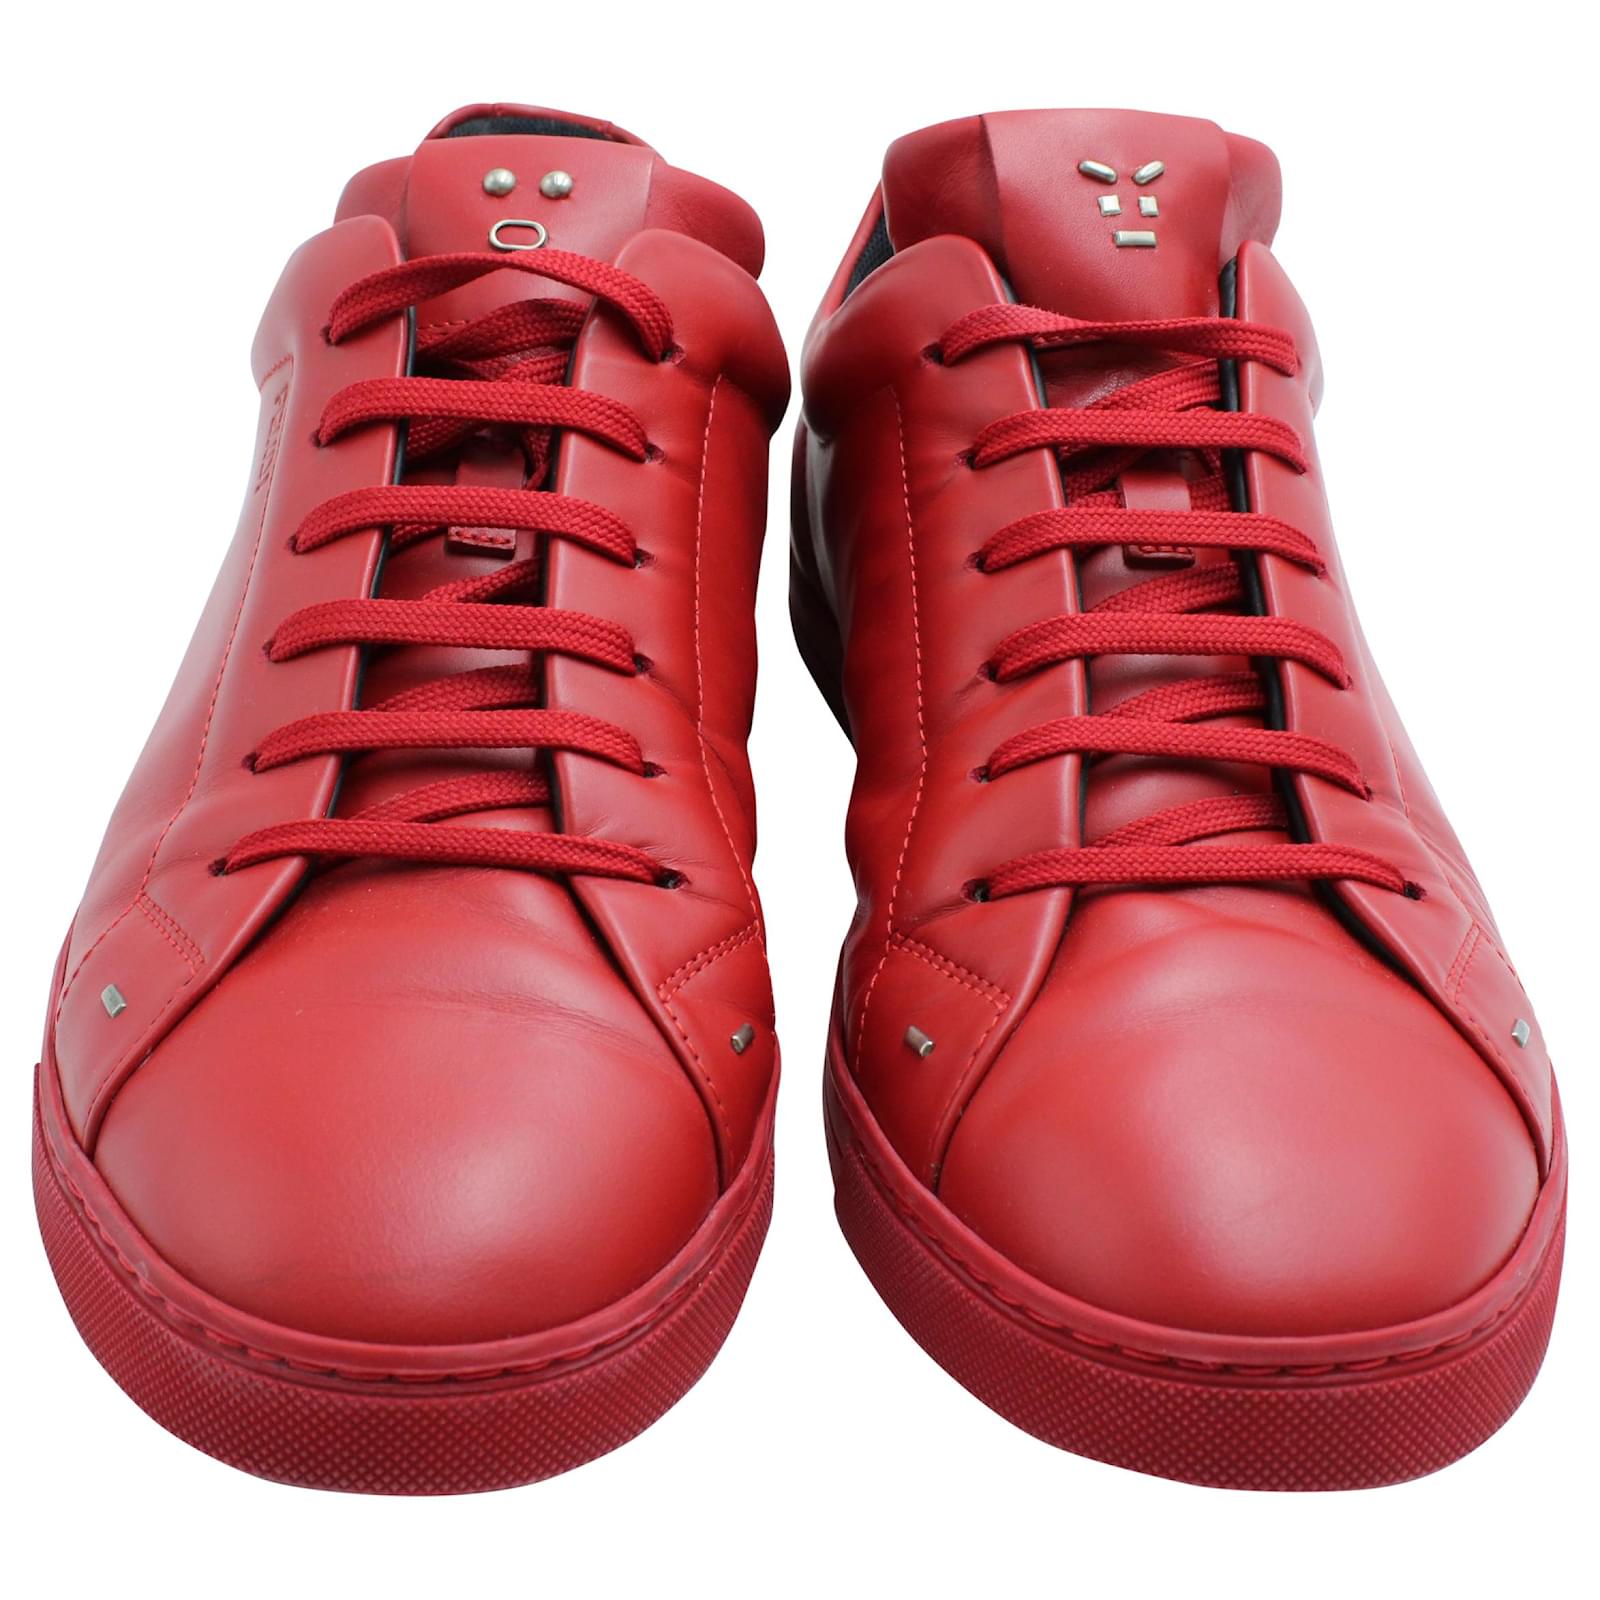 Christian Louboutin men sneakers US12M/EU46 Red leather solid low cut shoes  | eBay